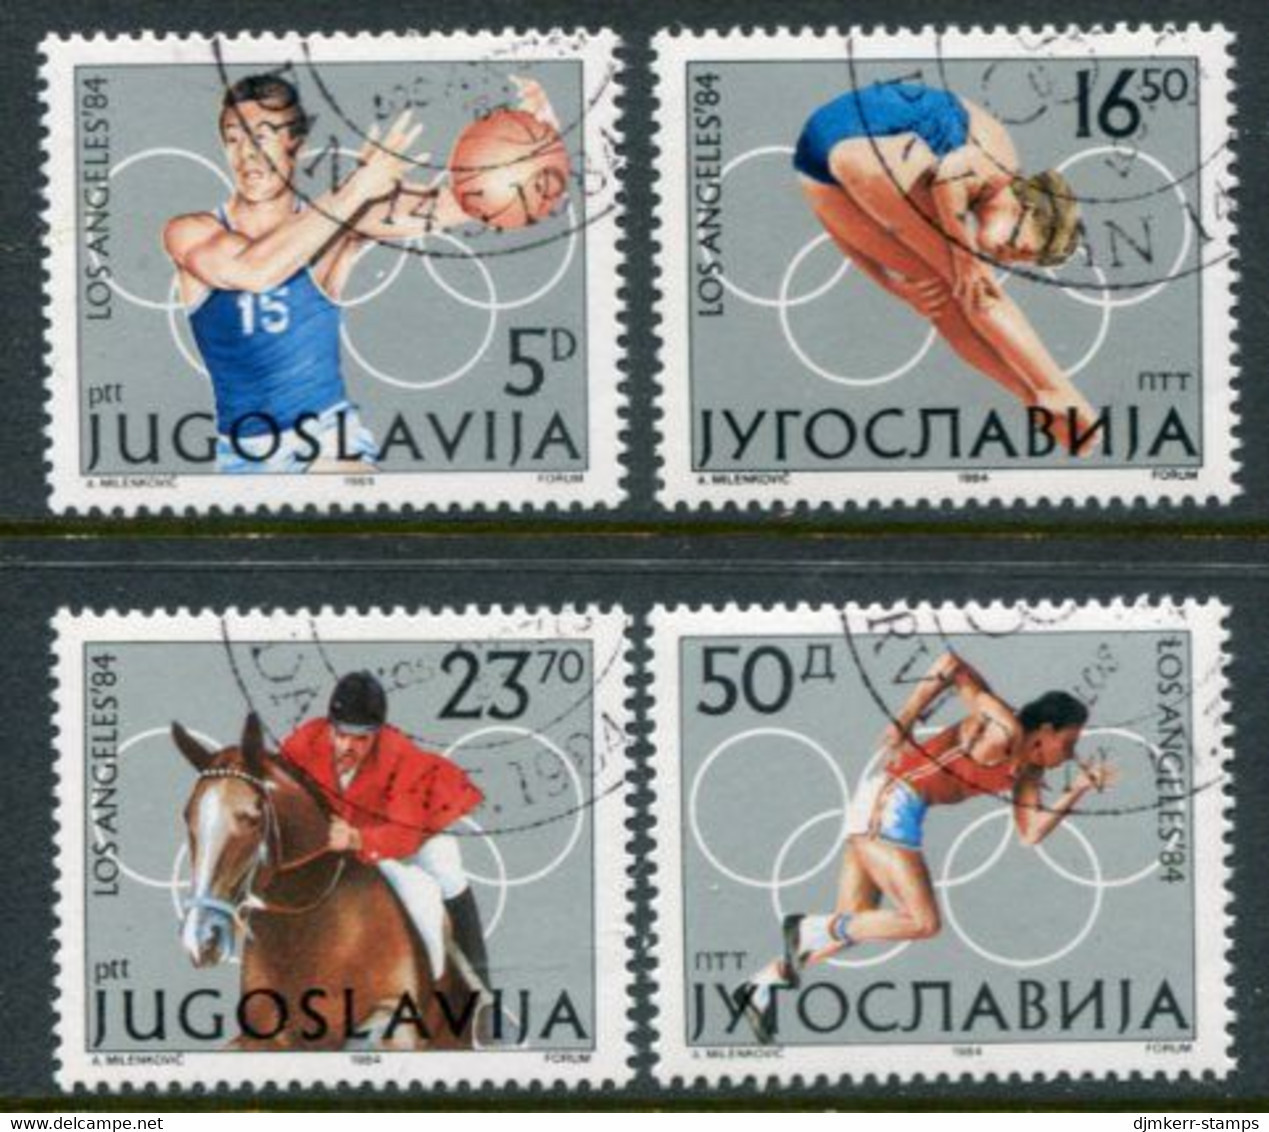 YUGOSLAVIA 1984  Olympic Games, Los Angeles  Used.  Michel 2048-51 - Used Stamps